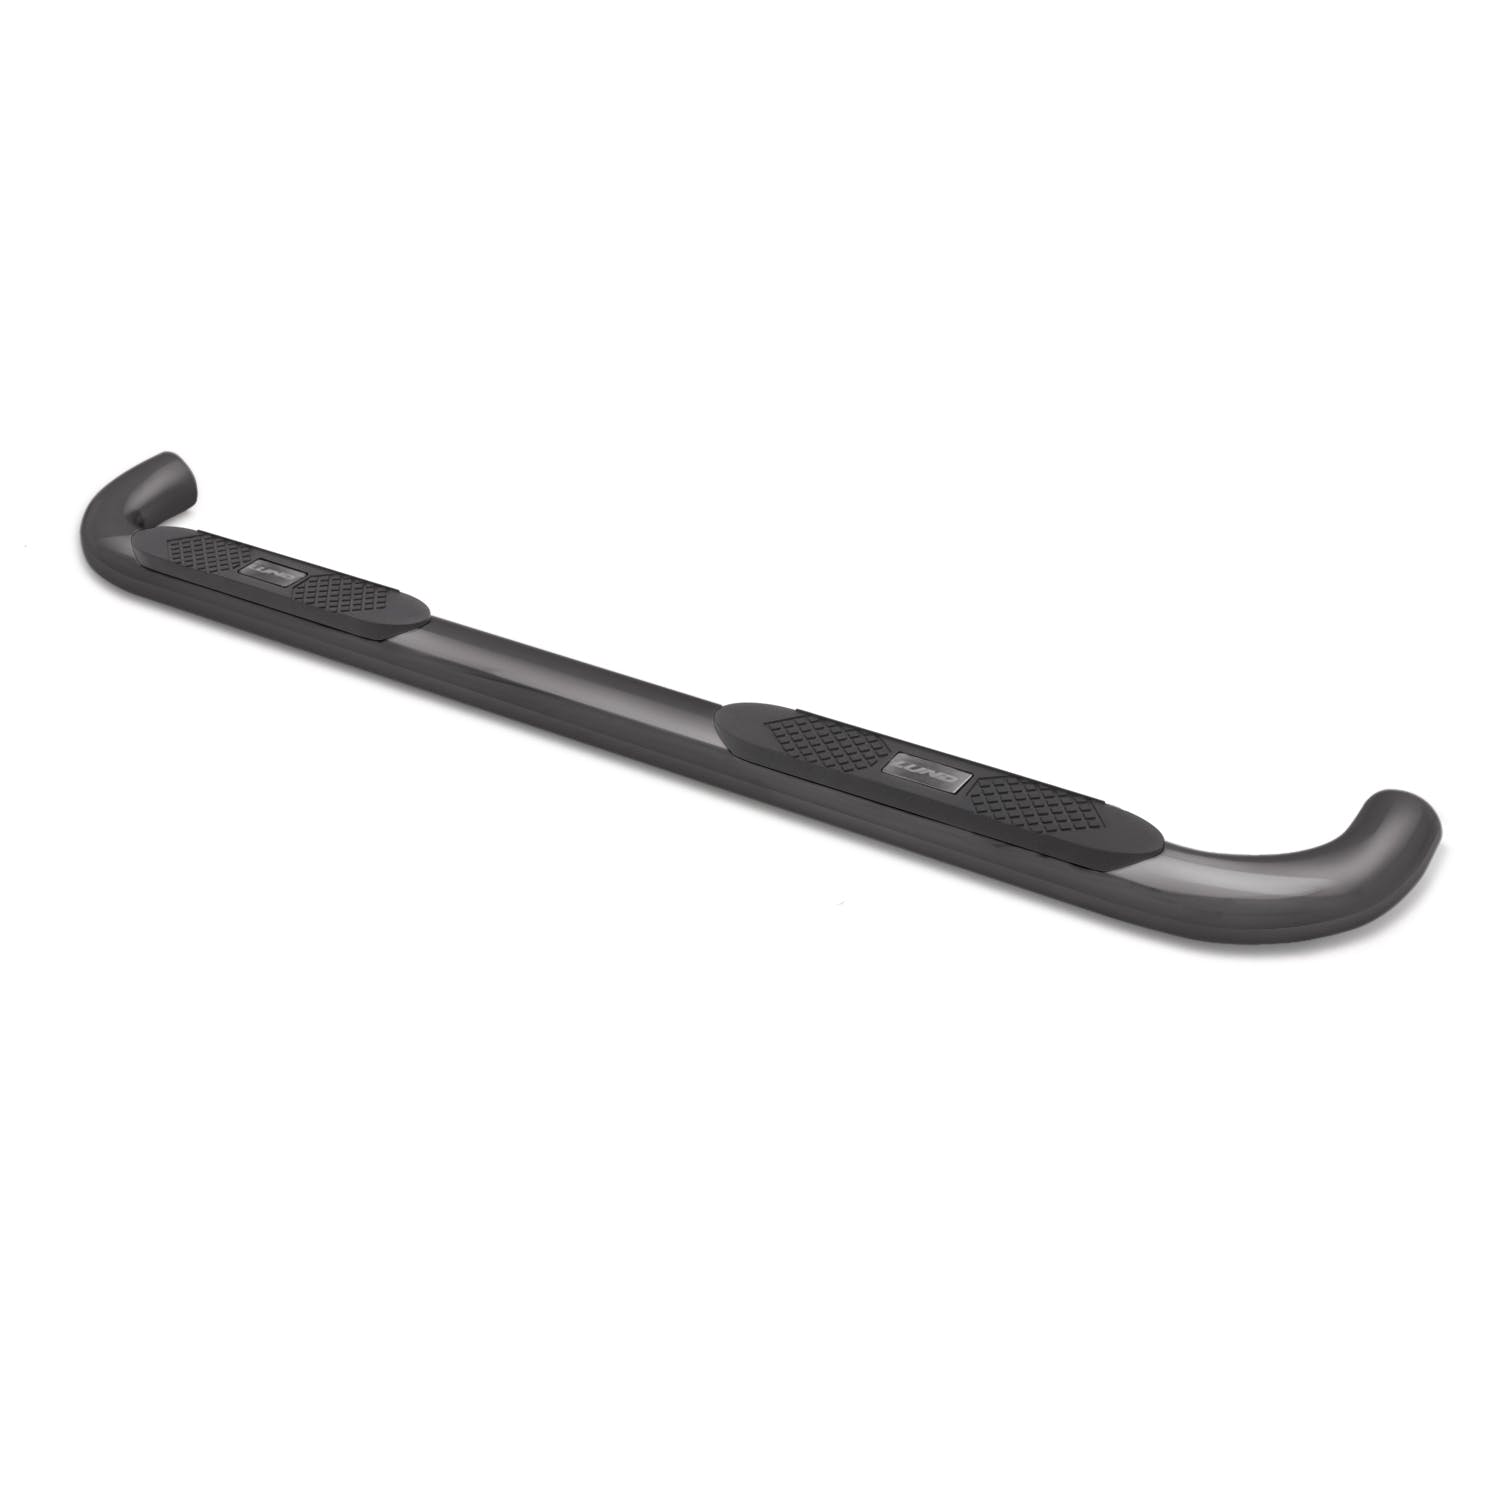 LUND 23461909 4 Inch Oval Curved Nerf Bar - Black 4 In OVAL CURVED STEEL